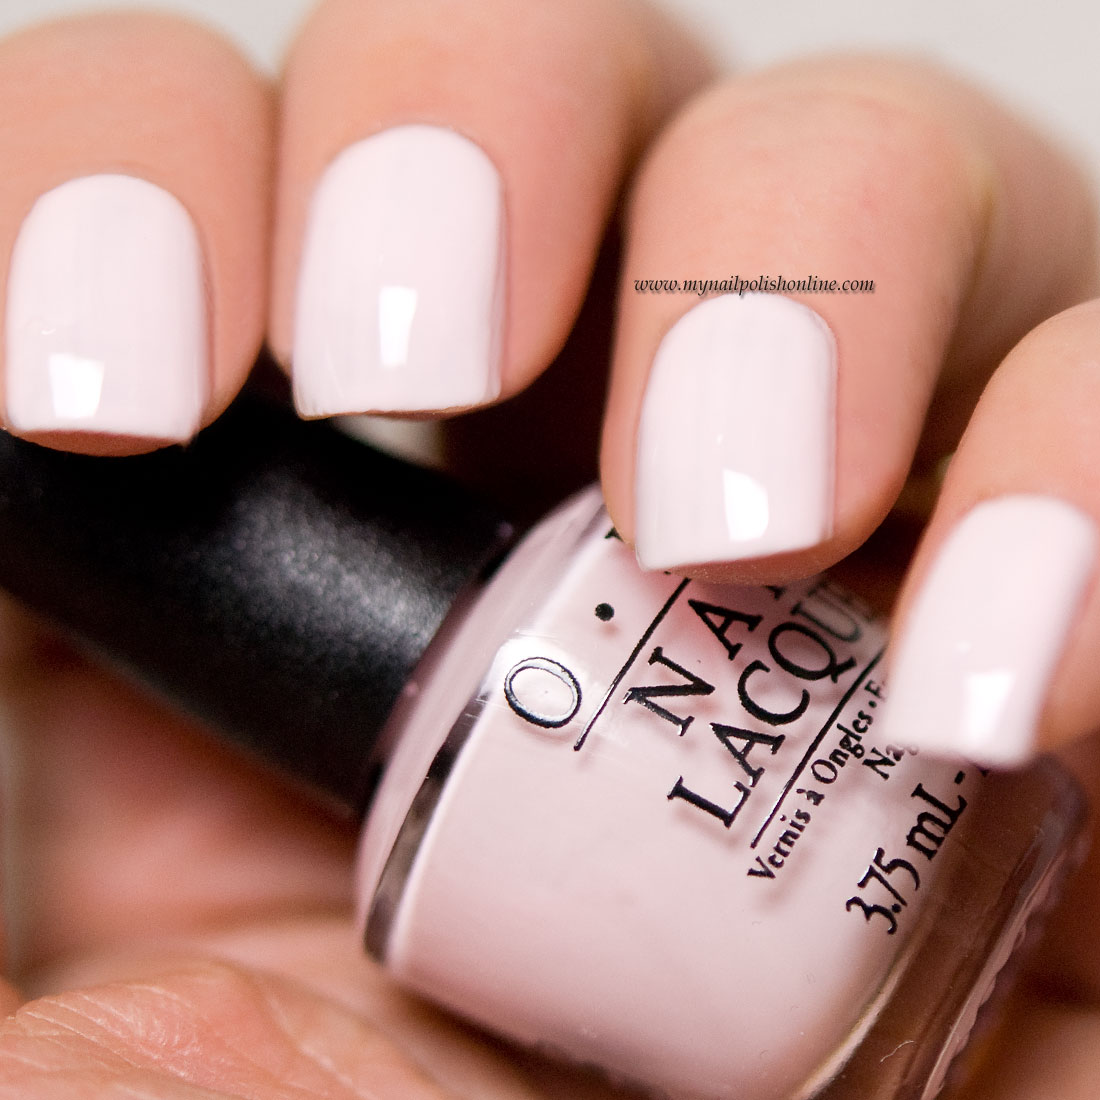 OPI - Let's be friends